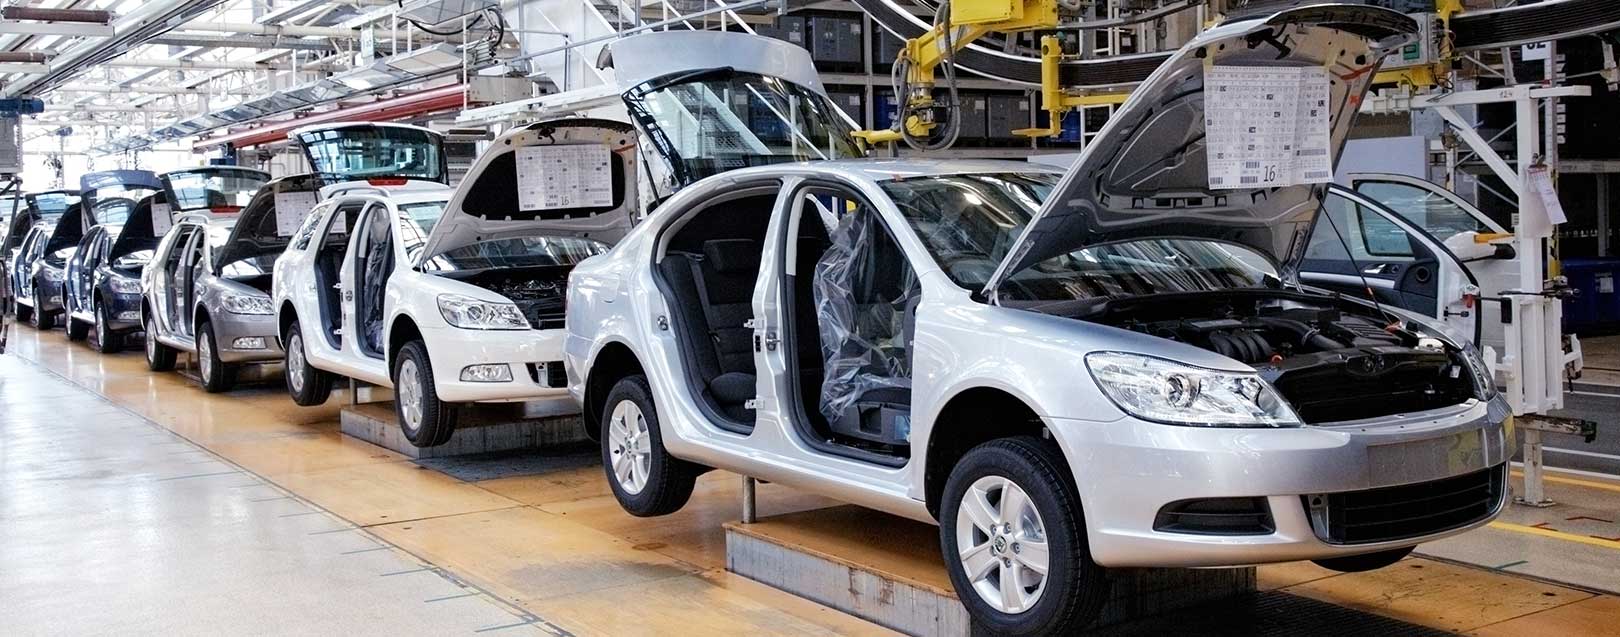 Auto sector to contribute 12% to India's GDP in next decade: Geete